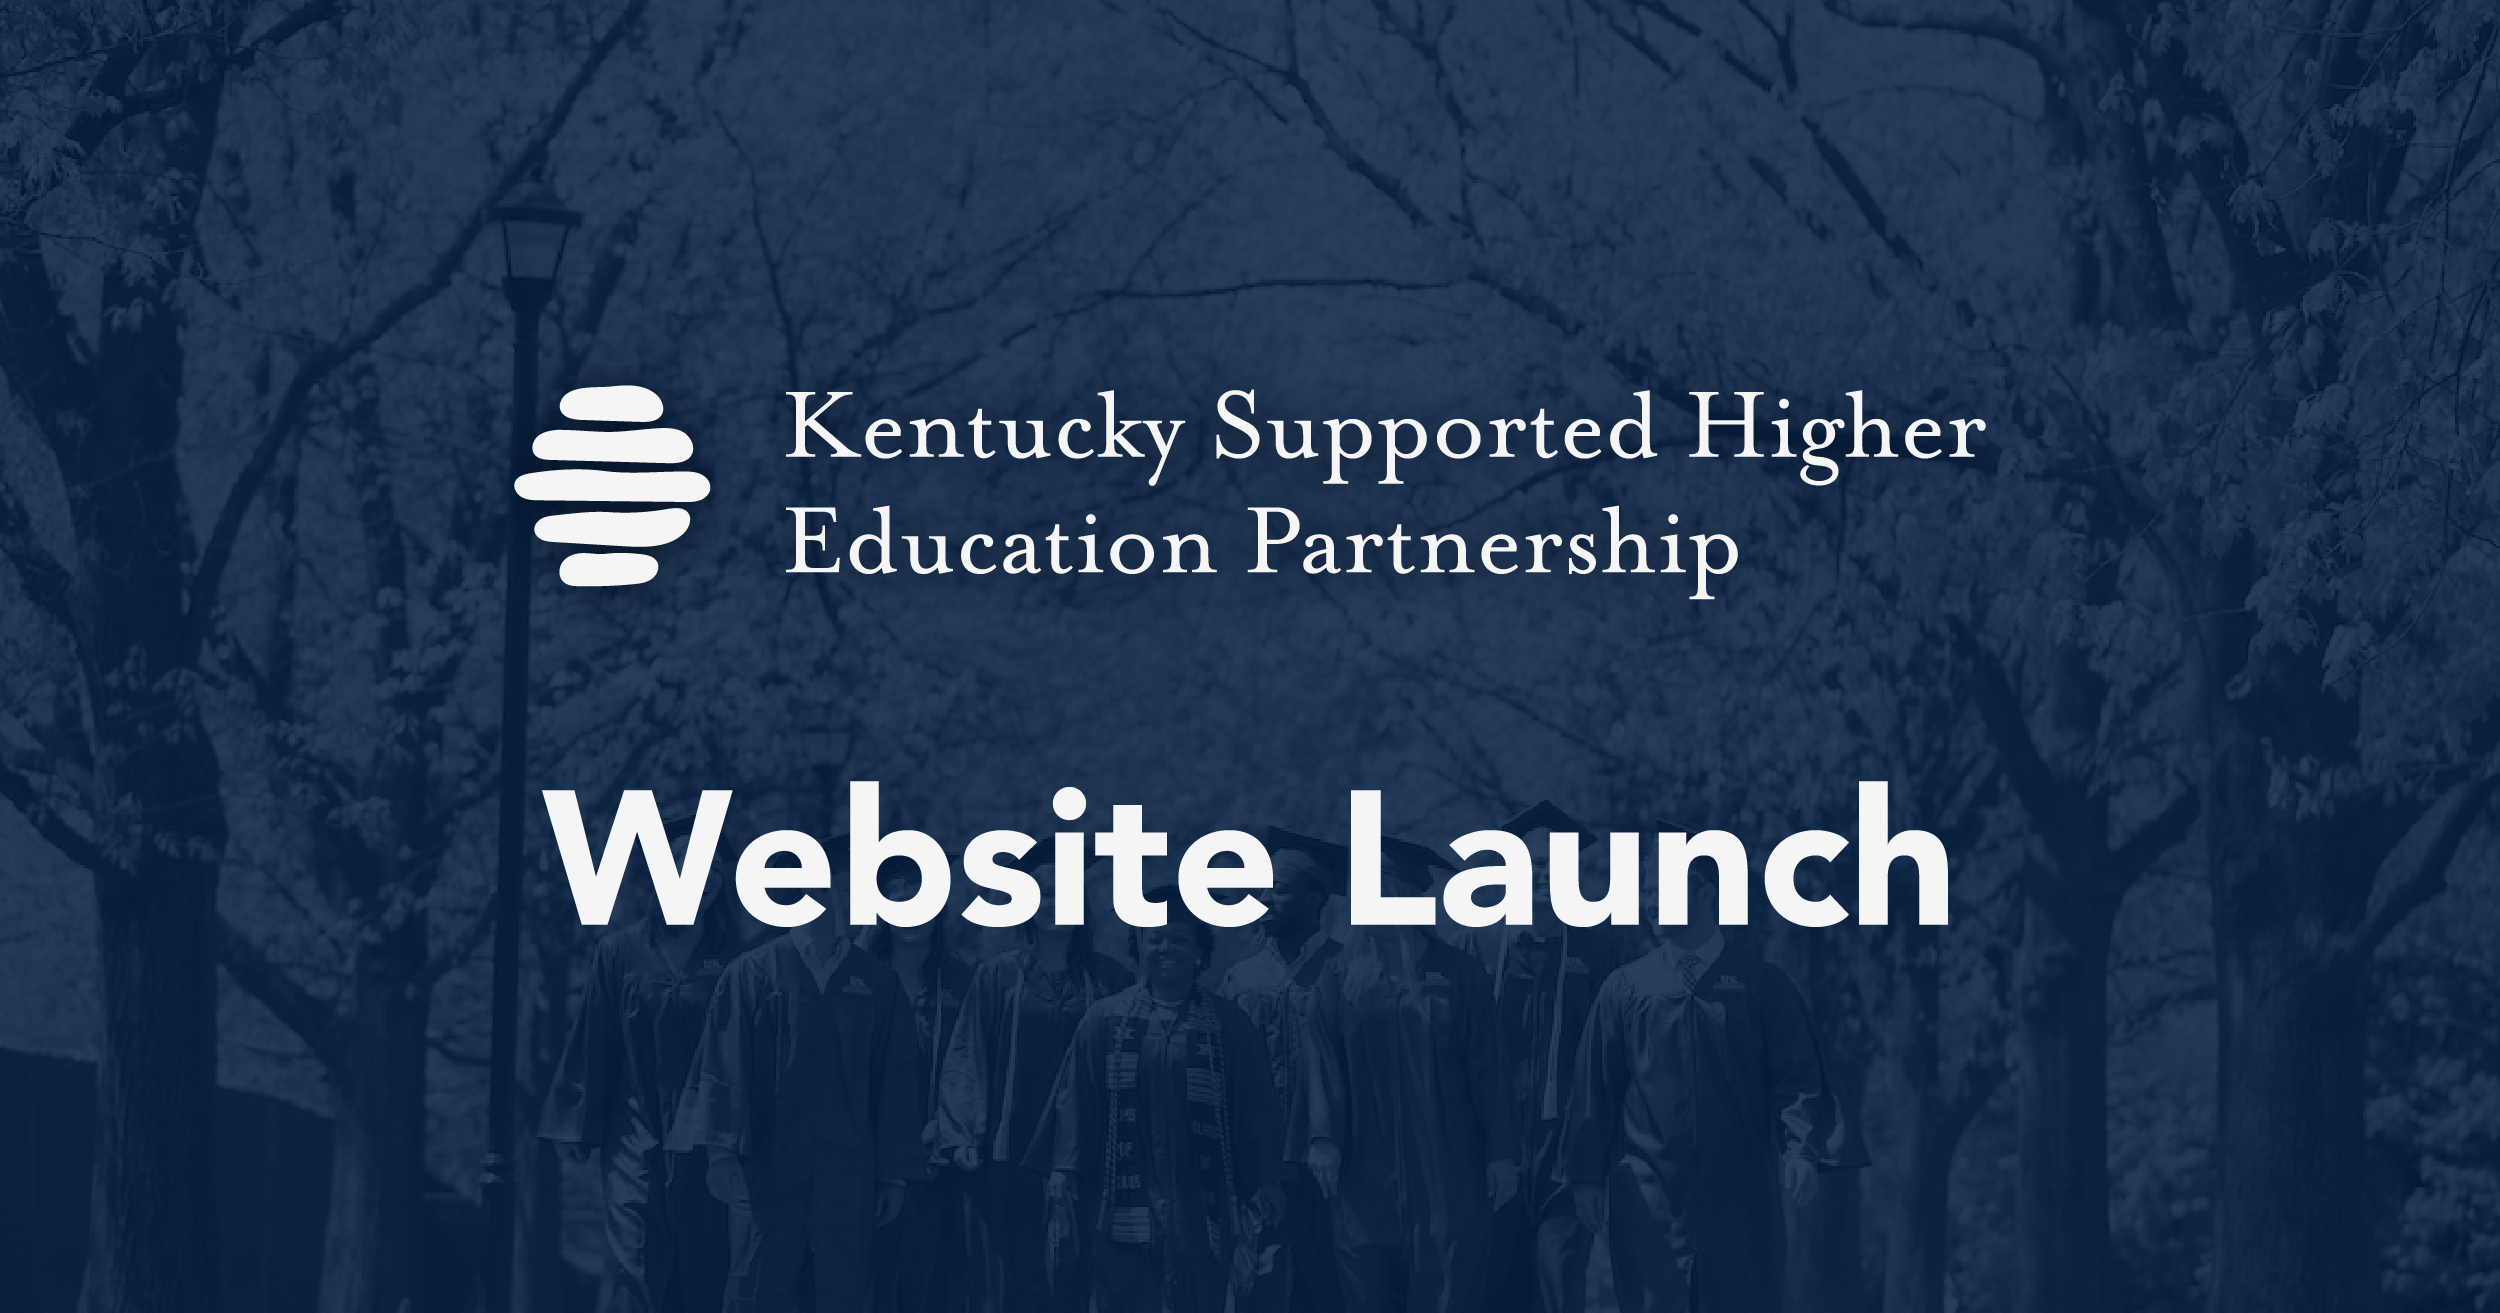 KSHEP Website Launch in white text on a dark blue background